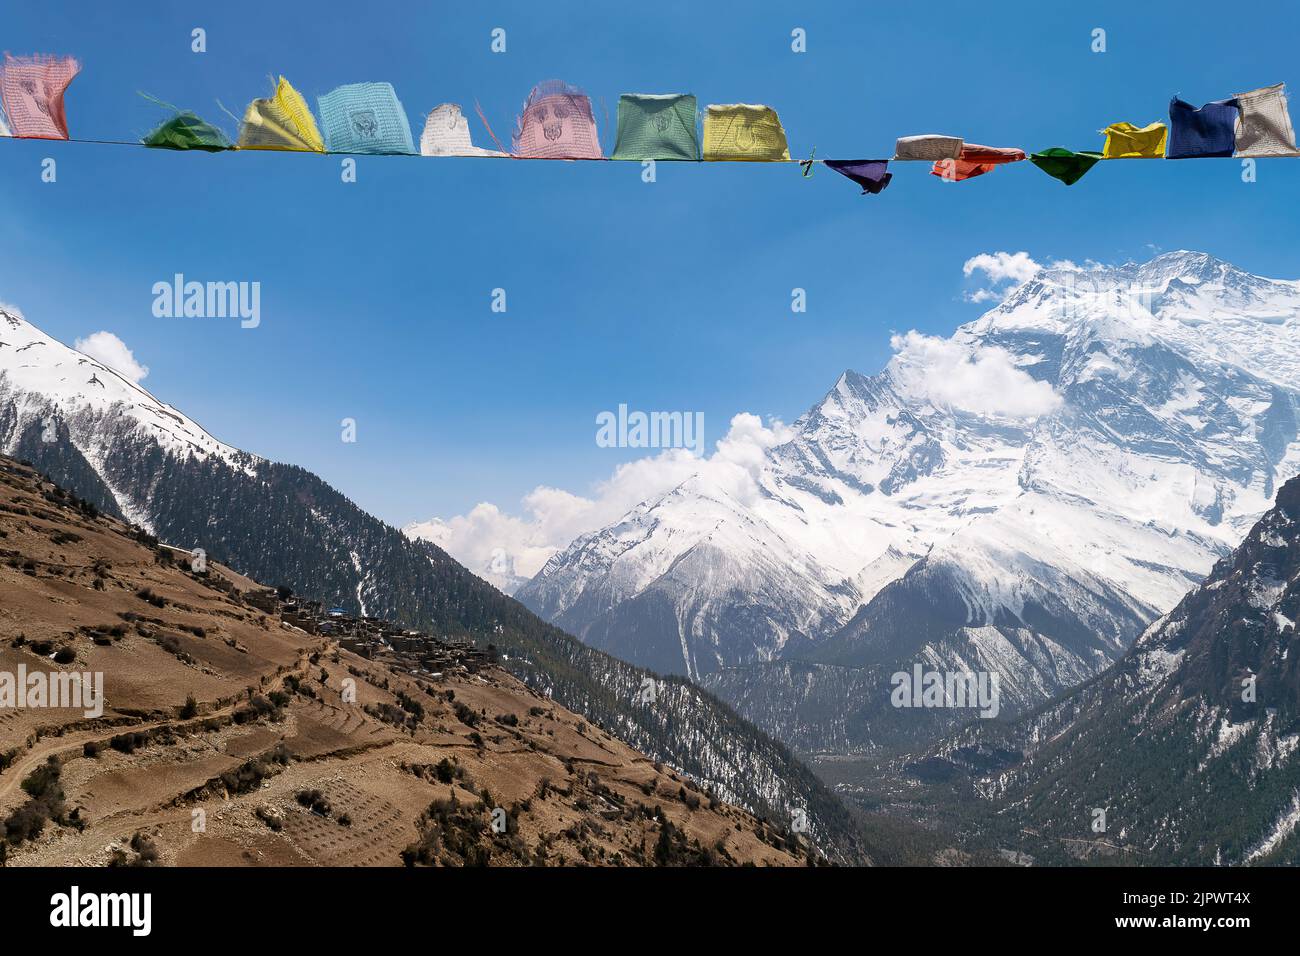 A beautiful view of a mountain landscape with laundry on wire under the blue sky Stock Photo